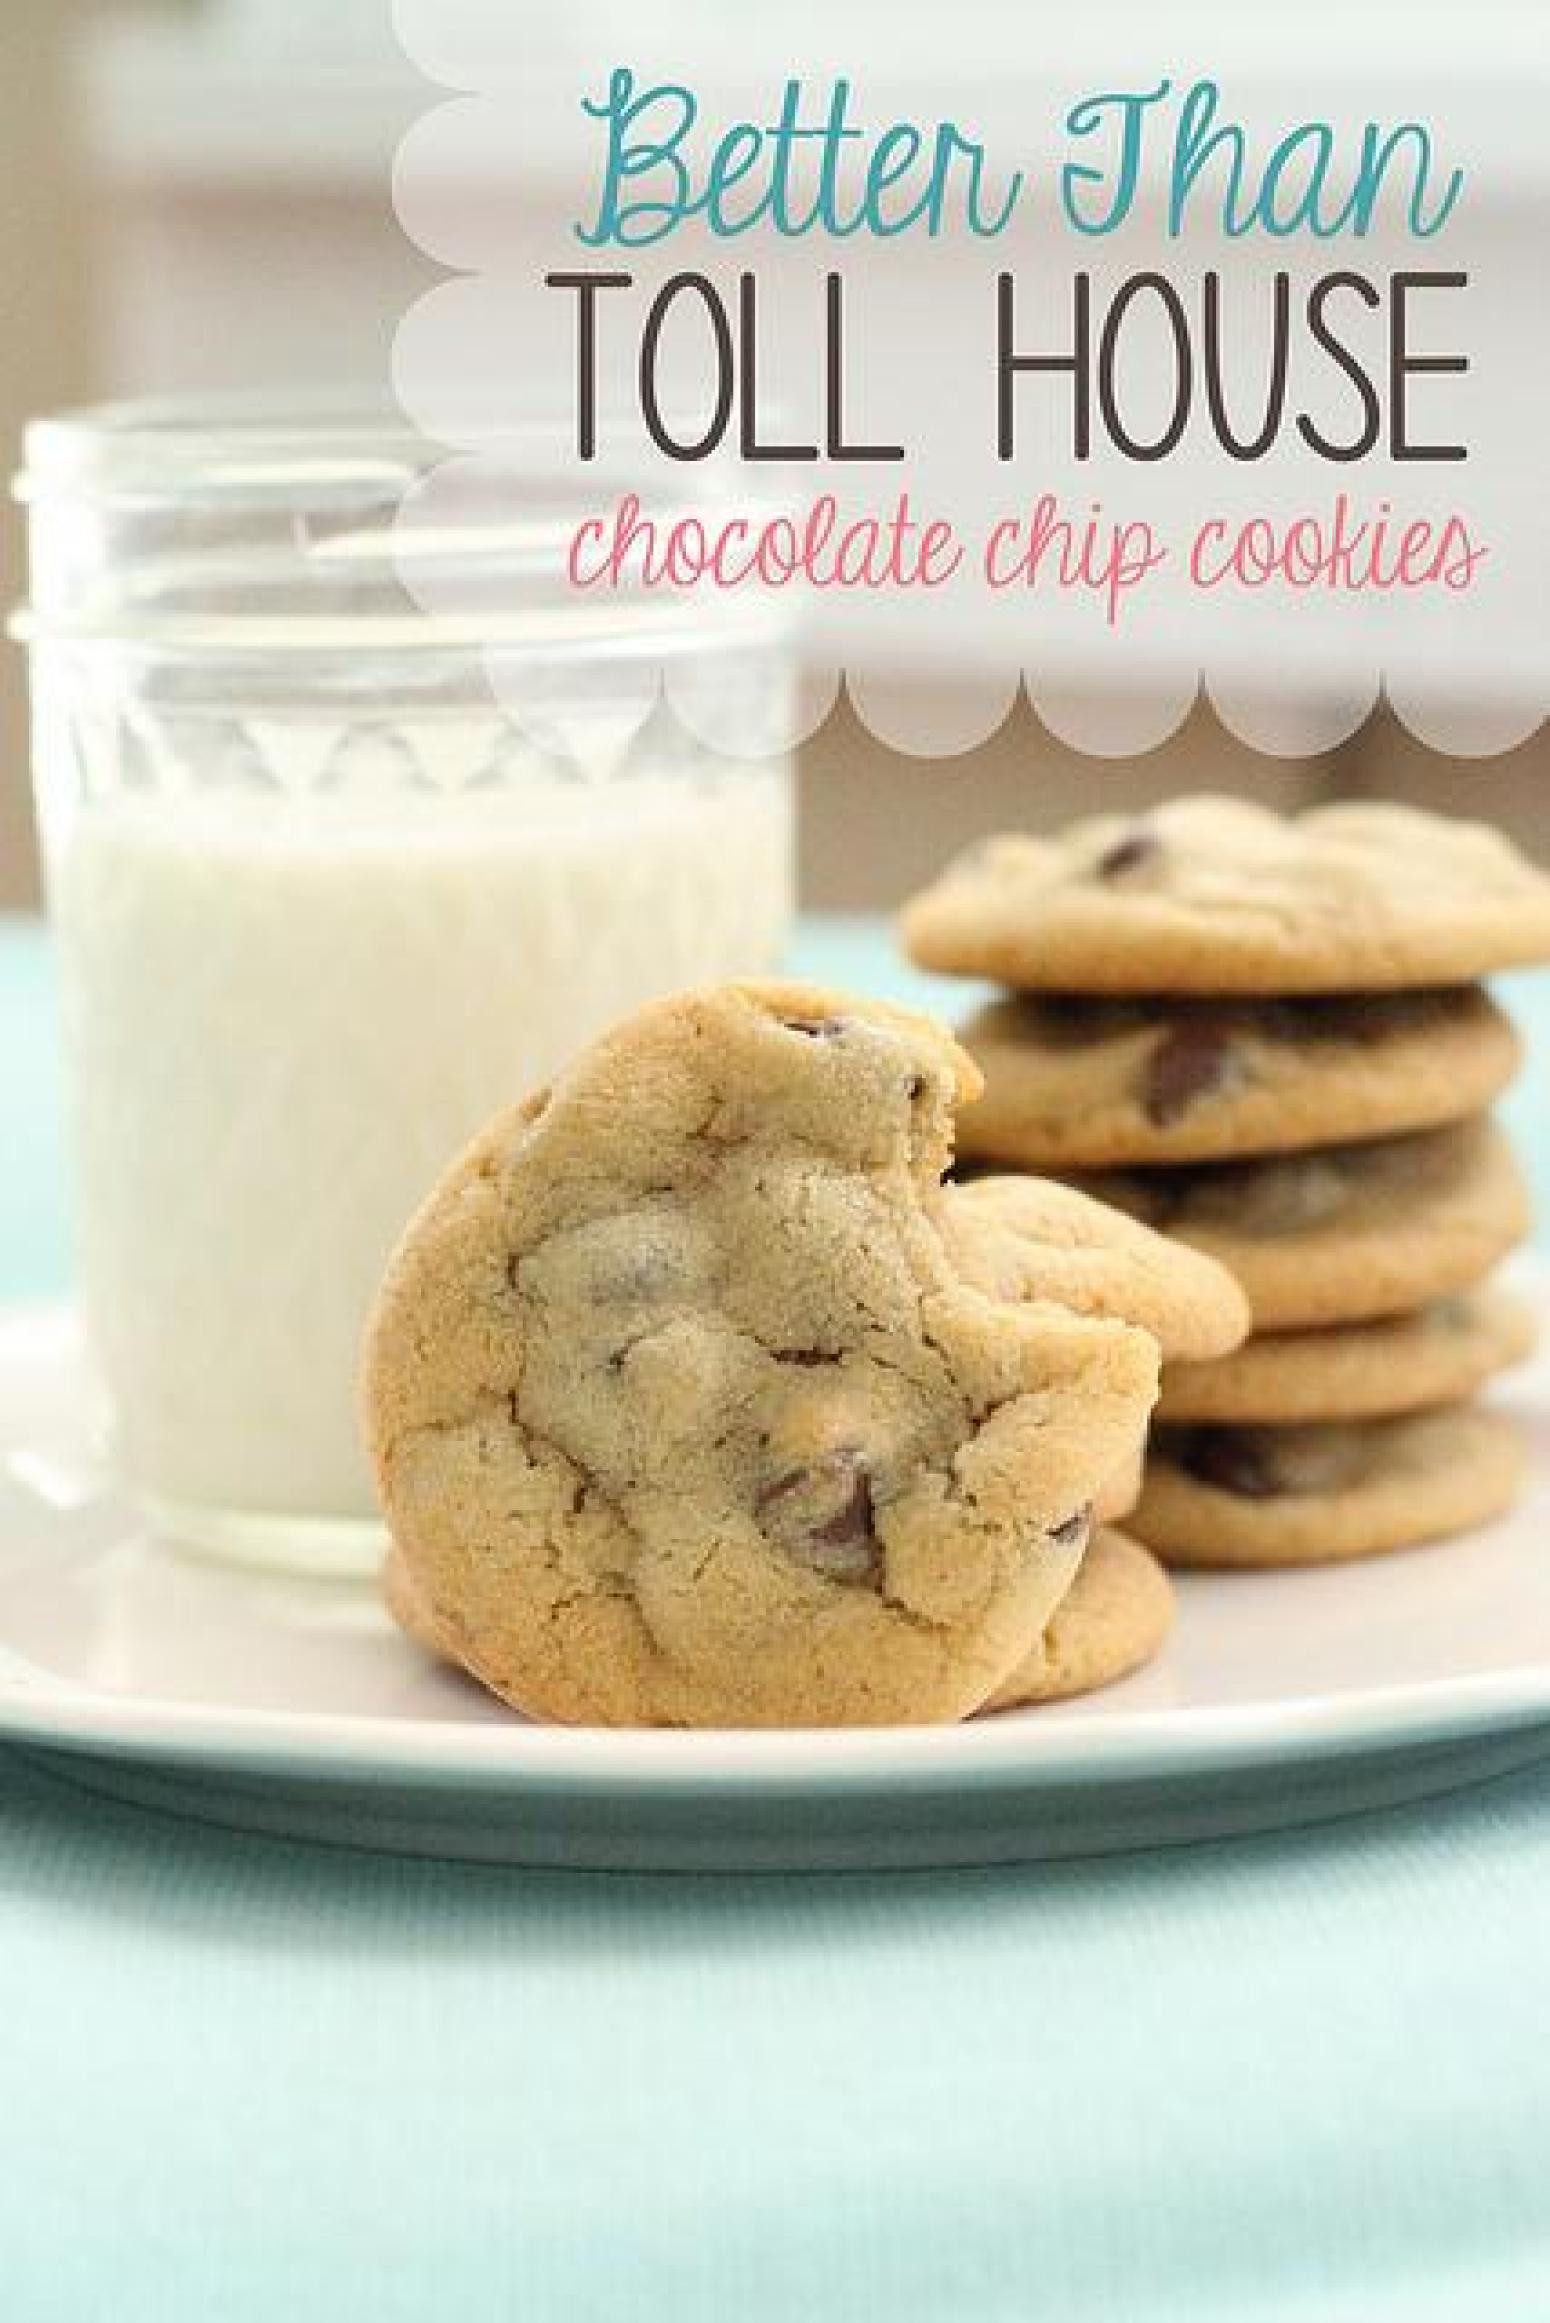 Toll House Chocolate Chip Cookies
 BETTER THAN TOLL HOUSE CHOCOLATE CHIP COOKIE RECIPE